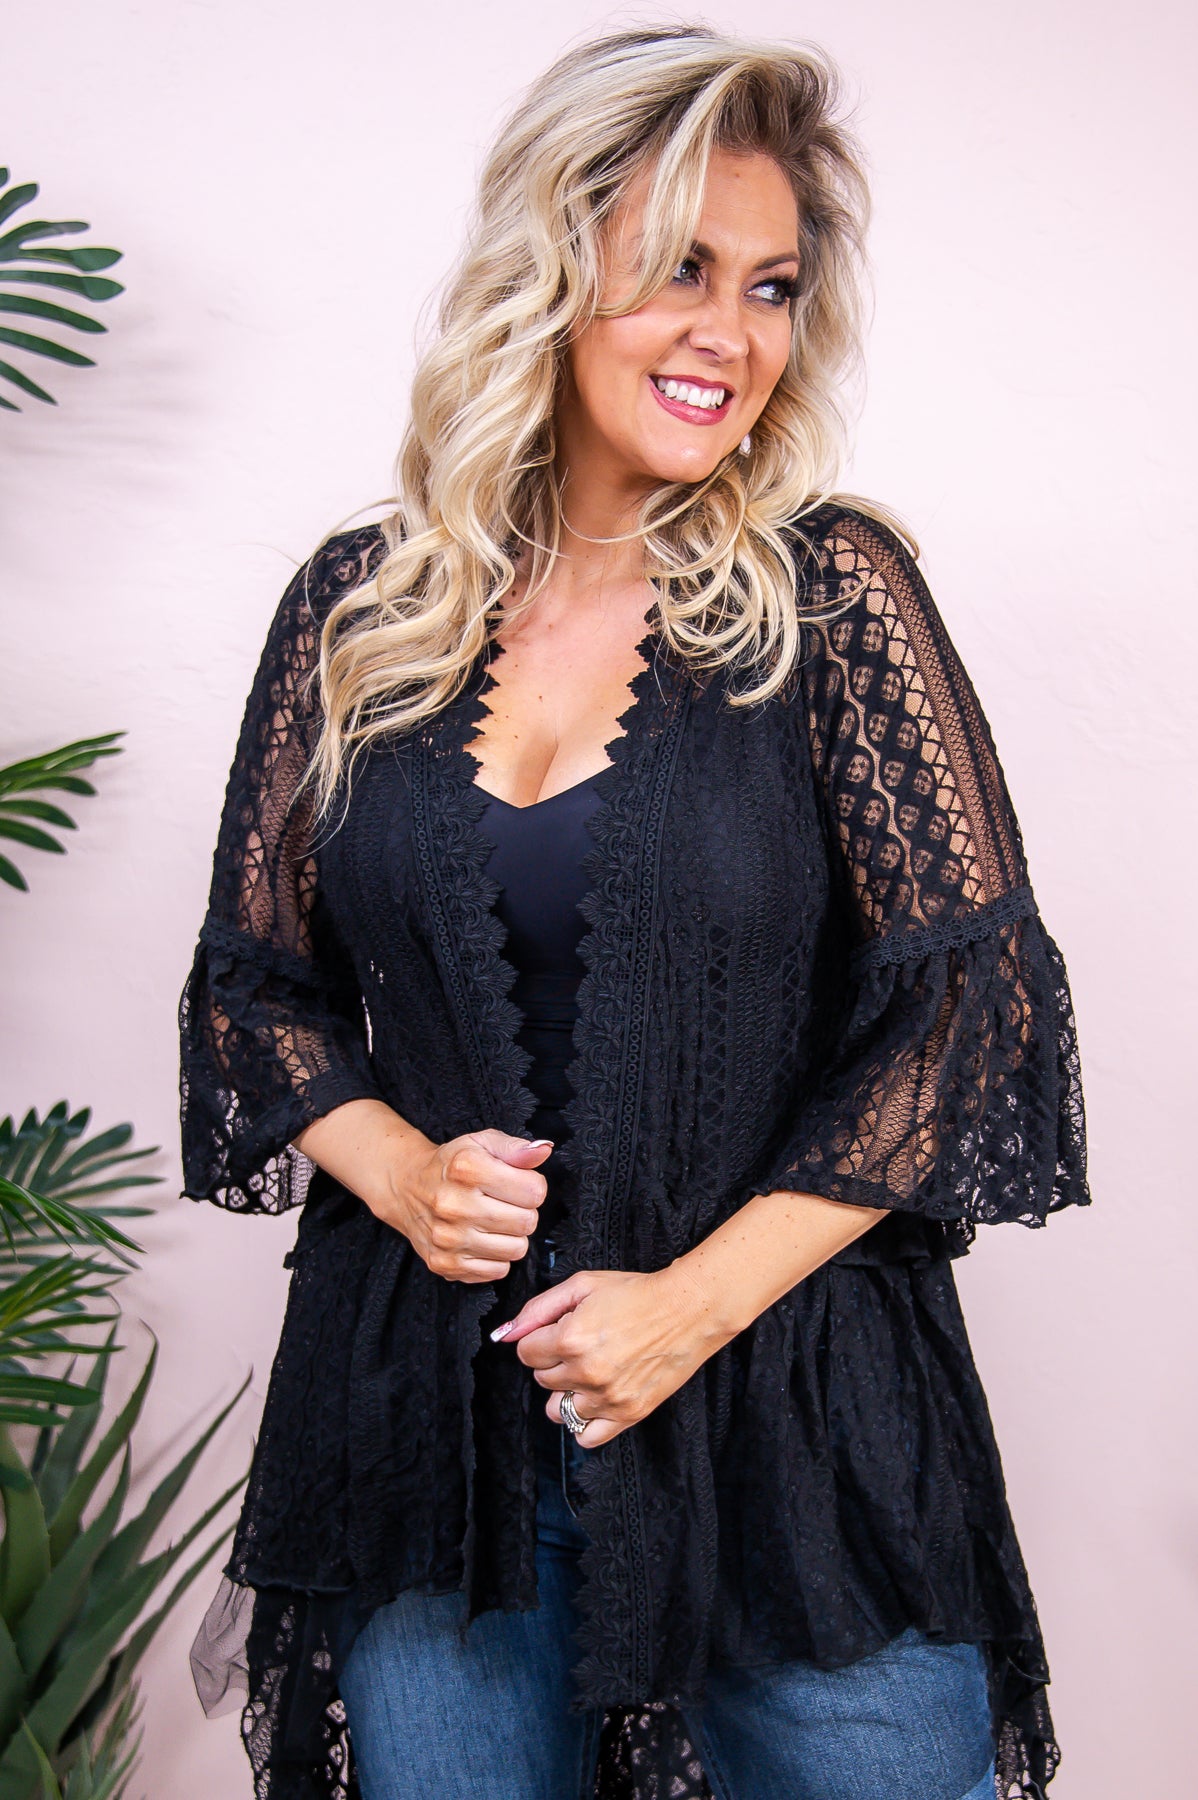 Easy On The Eyes Black Solid Lace High-Low Long Kimono - O5331BK